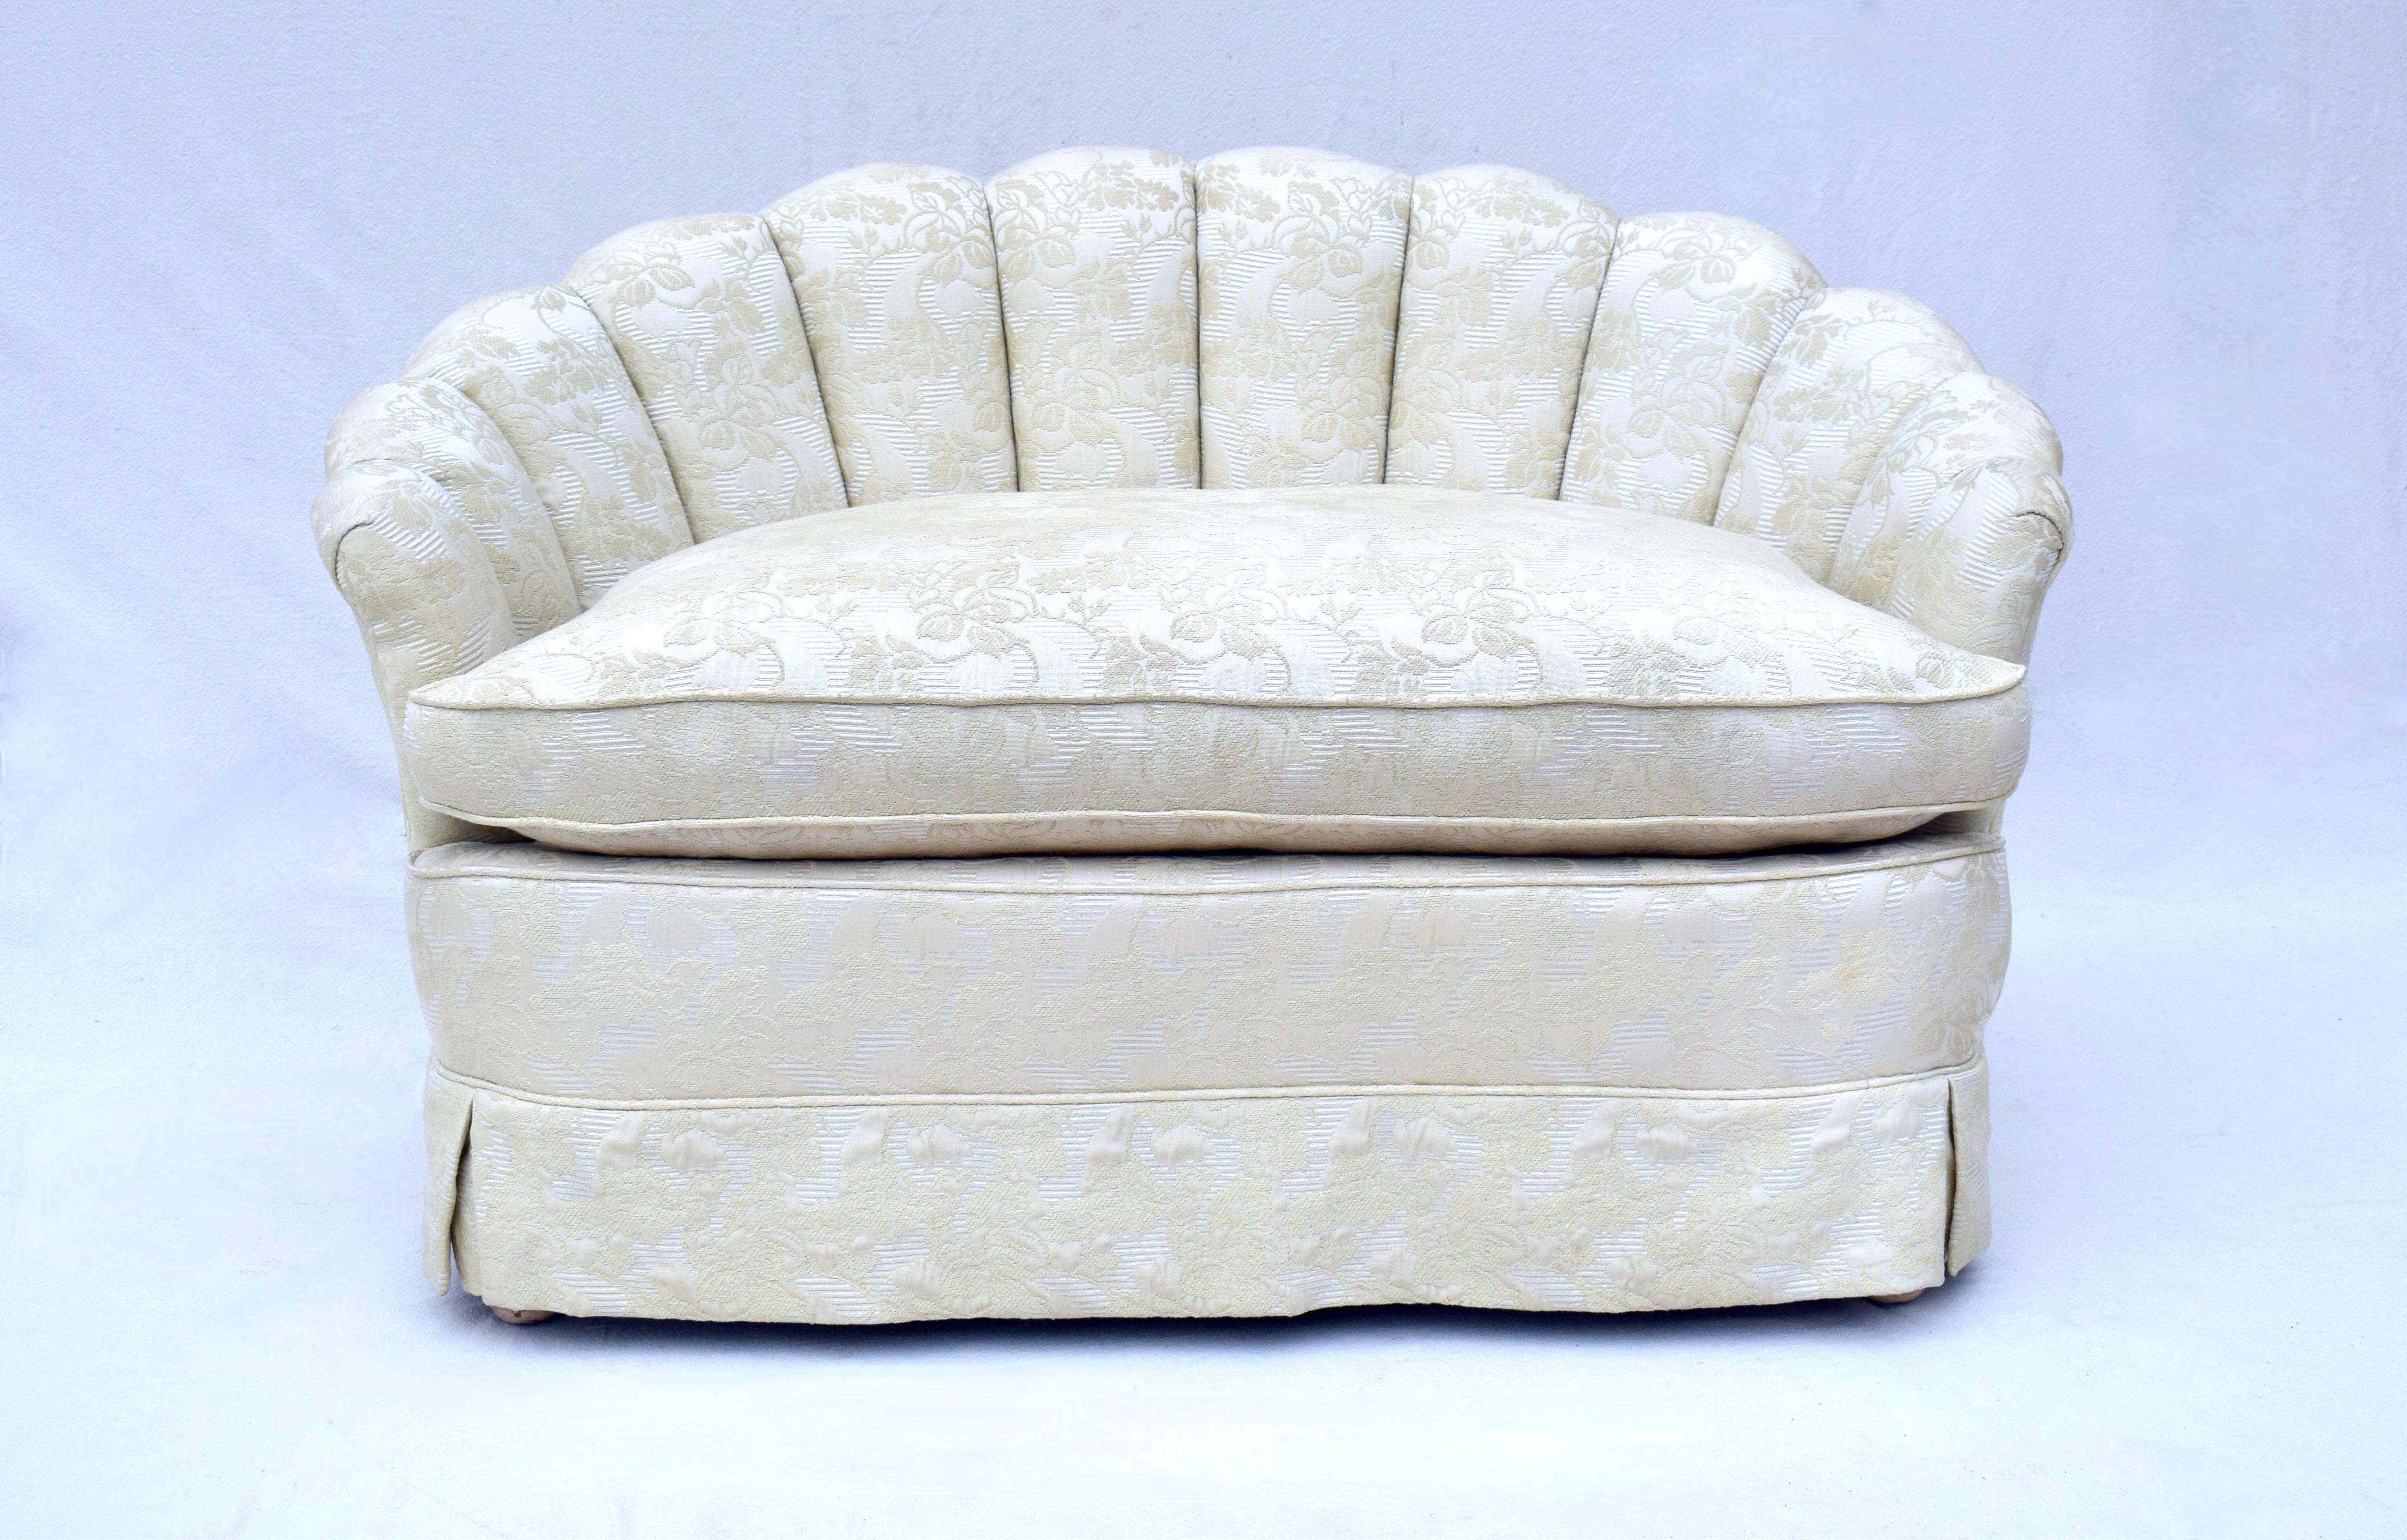 1940's Art Deco Hollywood Regency Channel back petit loveseat in exquisite vintage condition and exceptionally well maintained brocade floral upholstery. Aesthetically striking, enveloping and comfortable. Seat: 23